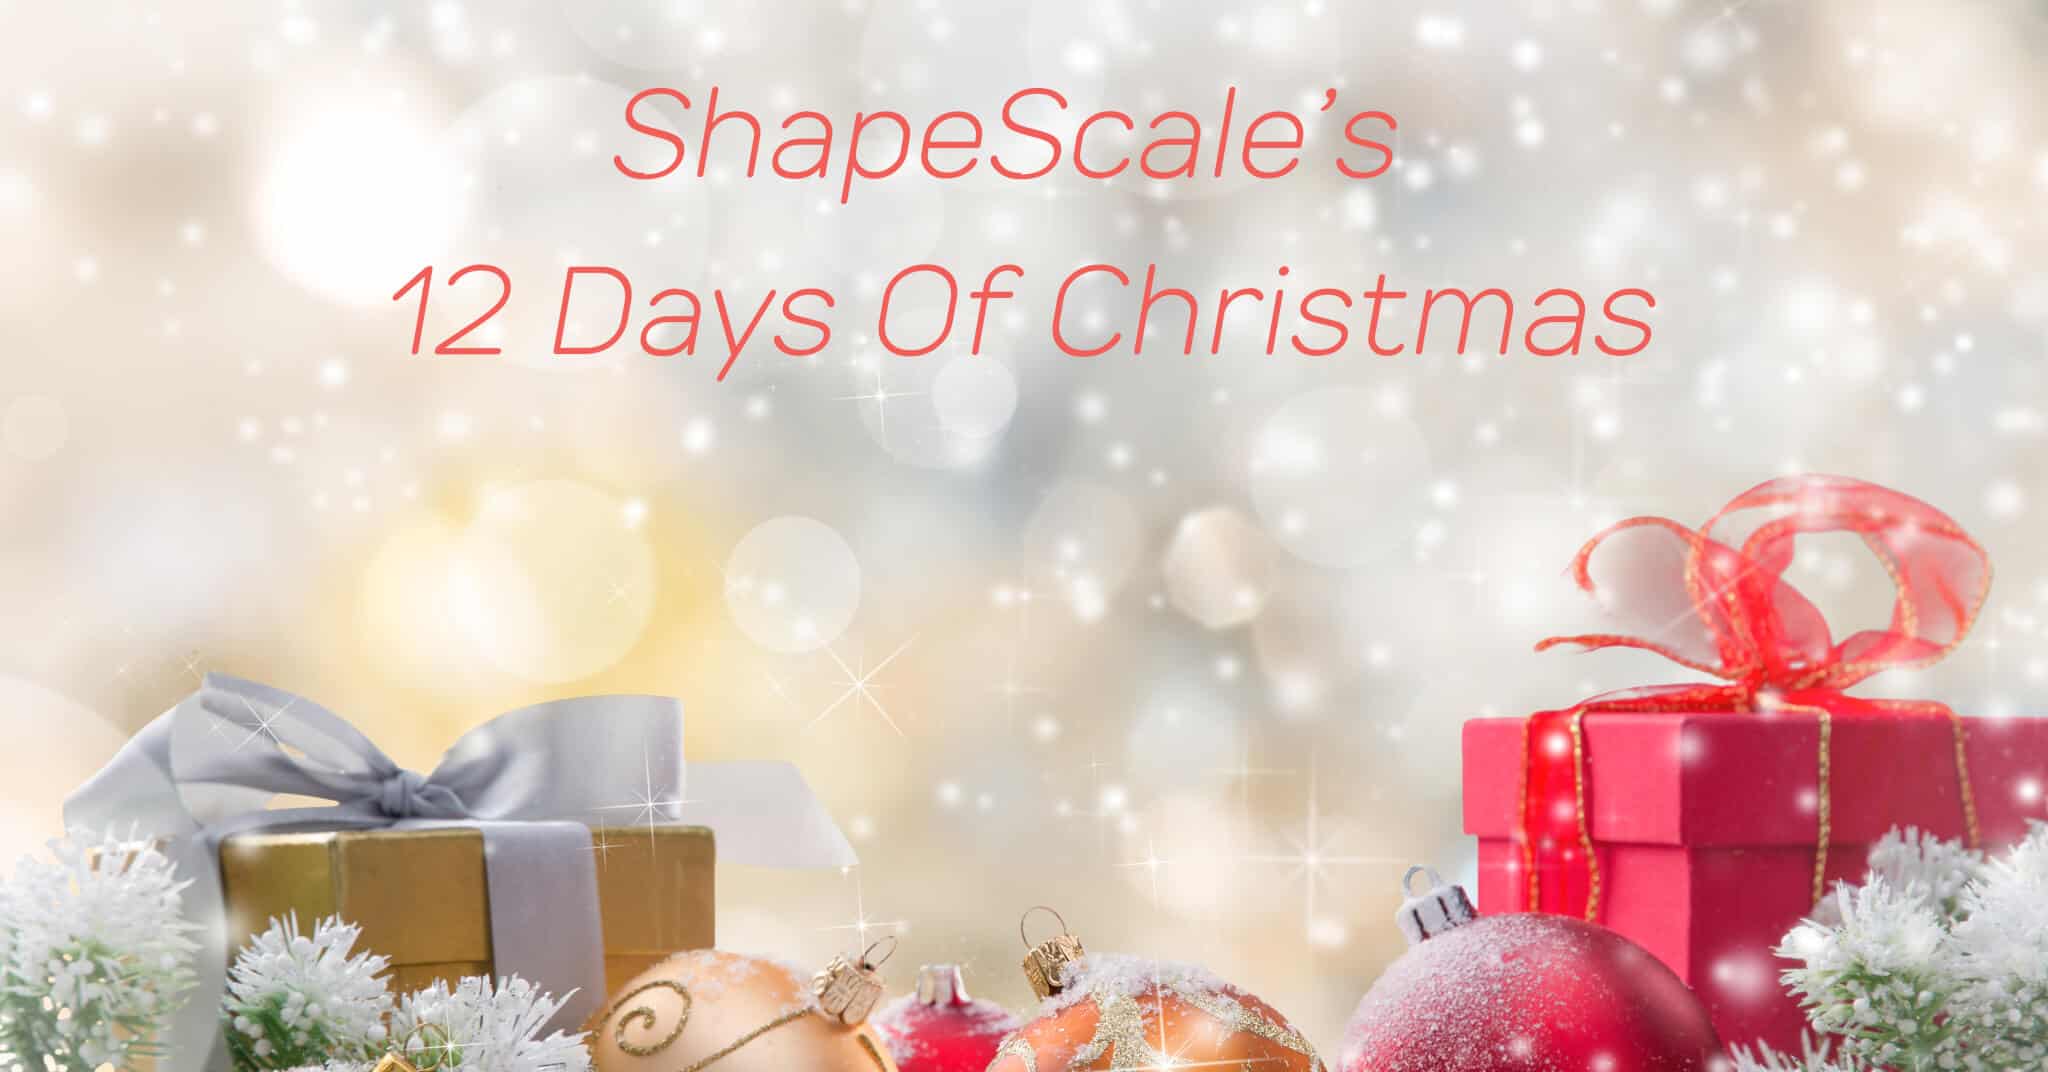 ShapeScale's 12 Days Of Christmas – 20 Fit